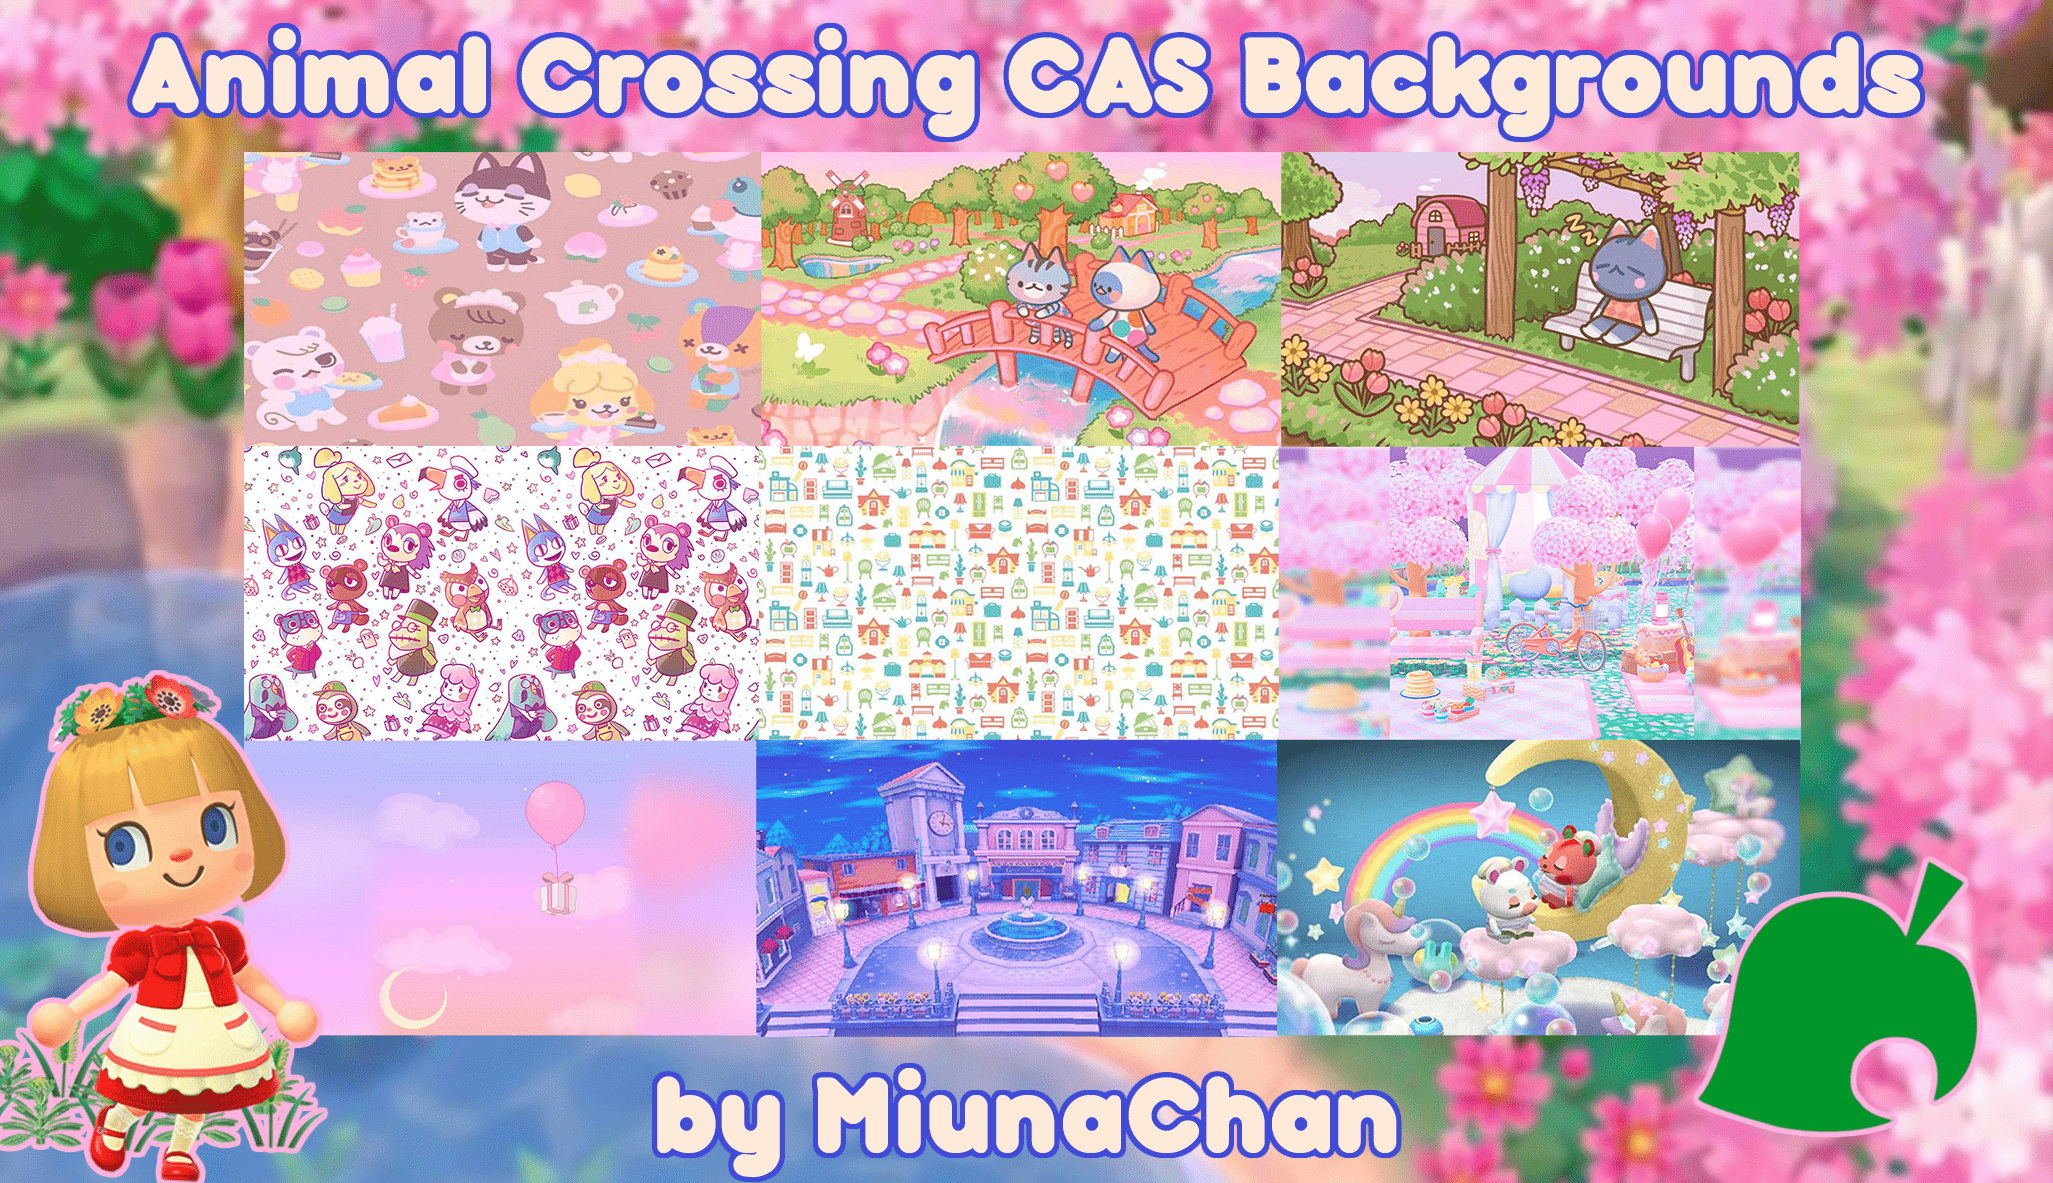 Animal Crossing фон. Animal Crossing обои. SIMS 4 CAS background. CAS backgrounds PNG.